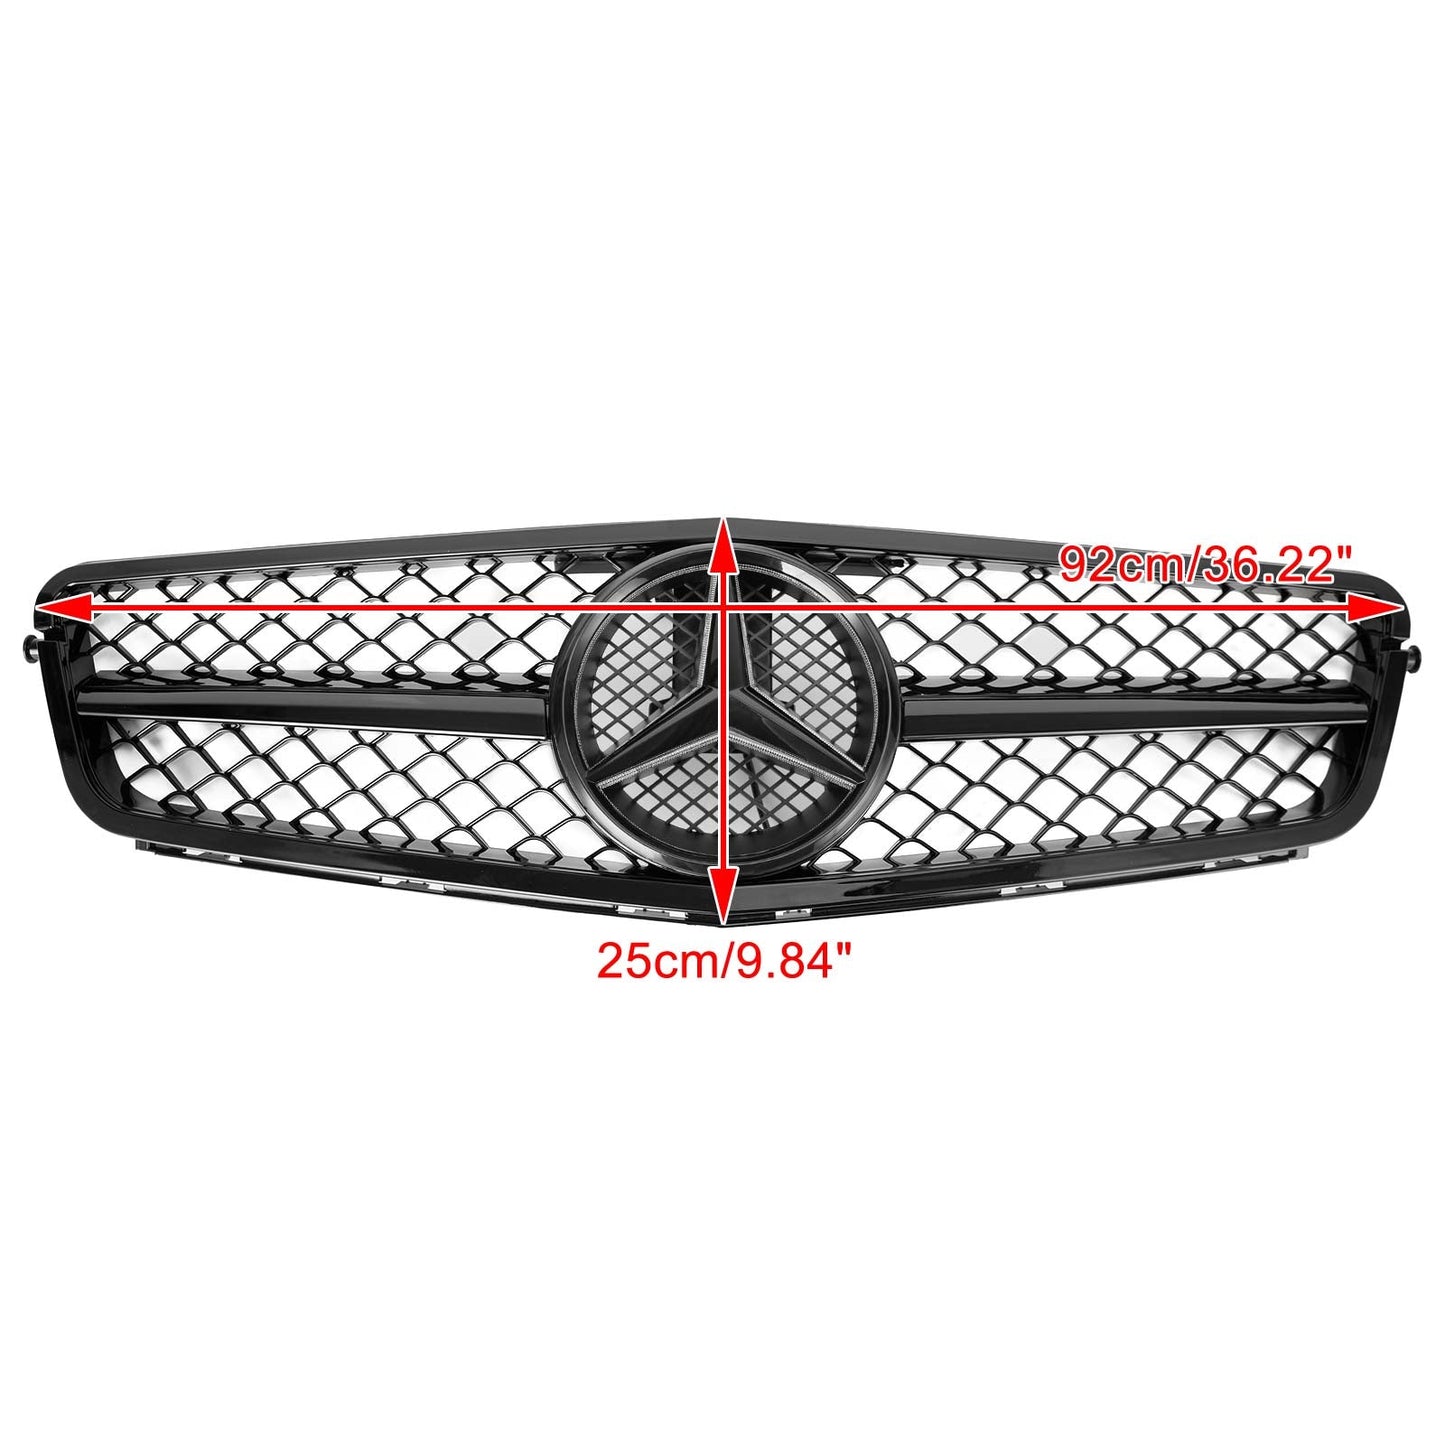 AMG 2008-2014 C-Class Benz W204 C300 C350 w/LED Front Bumper Car Grille Grill